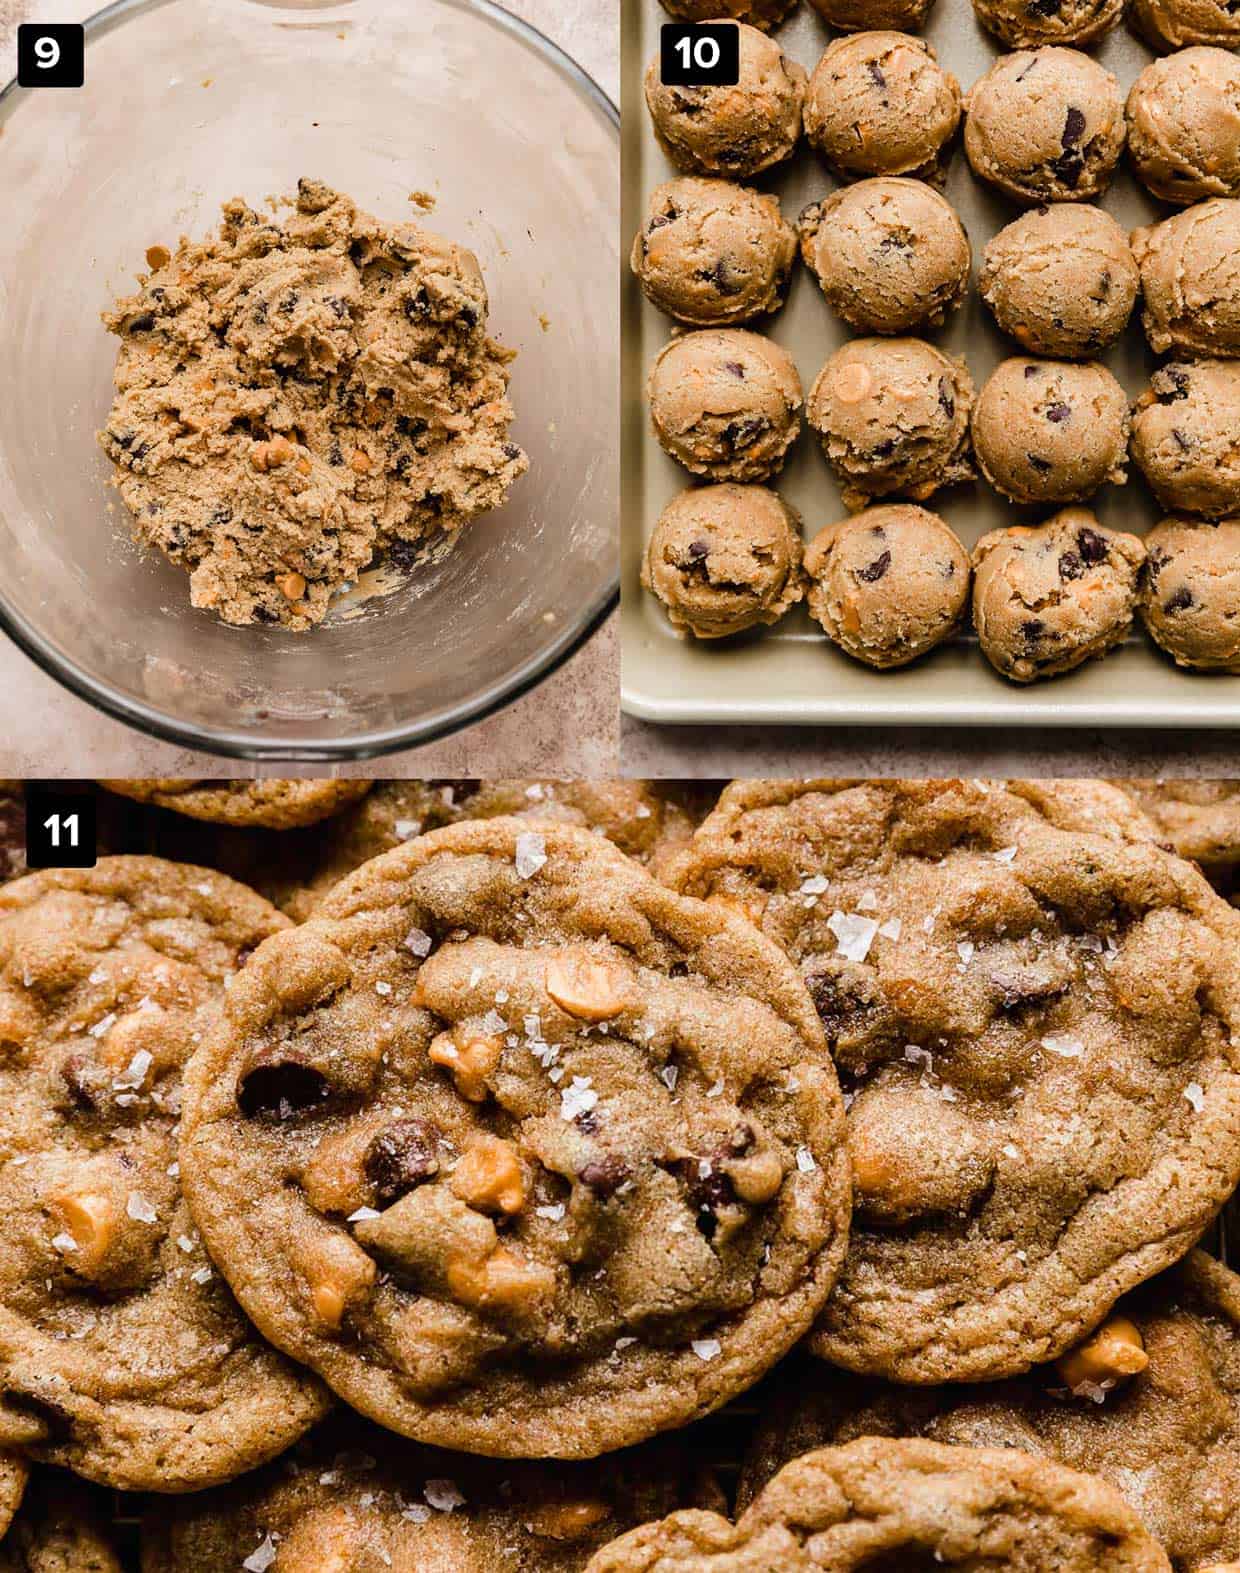 Three photos: left, a glass bowl with Butterscotch Chocolate Chip Cookie dough in it, right photo is the dough formed into balls, and photo on bottom is baked cookies.